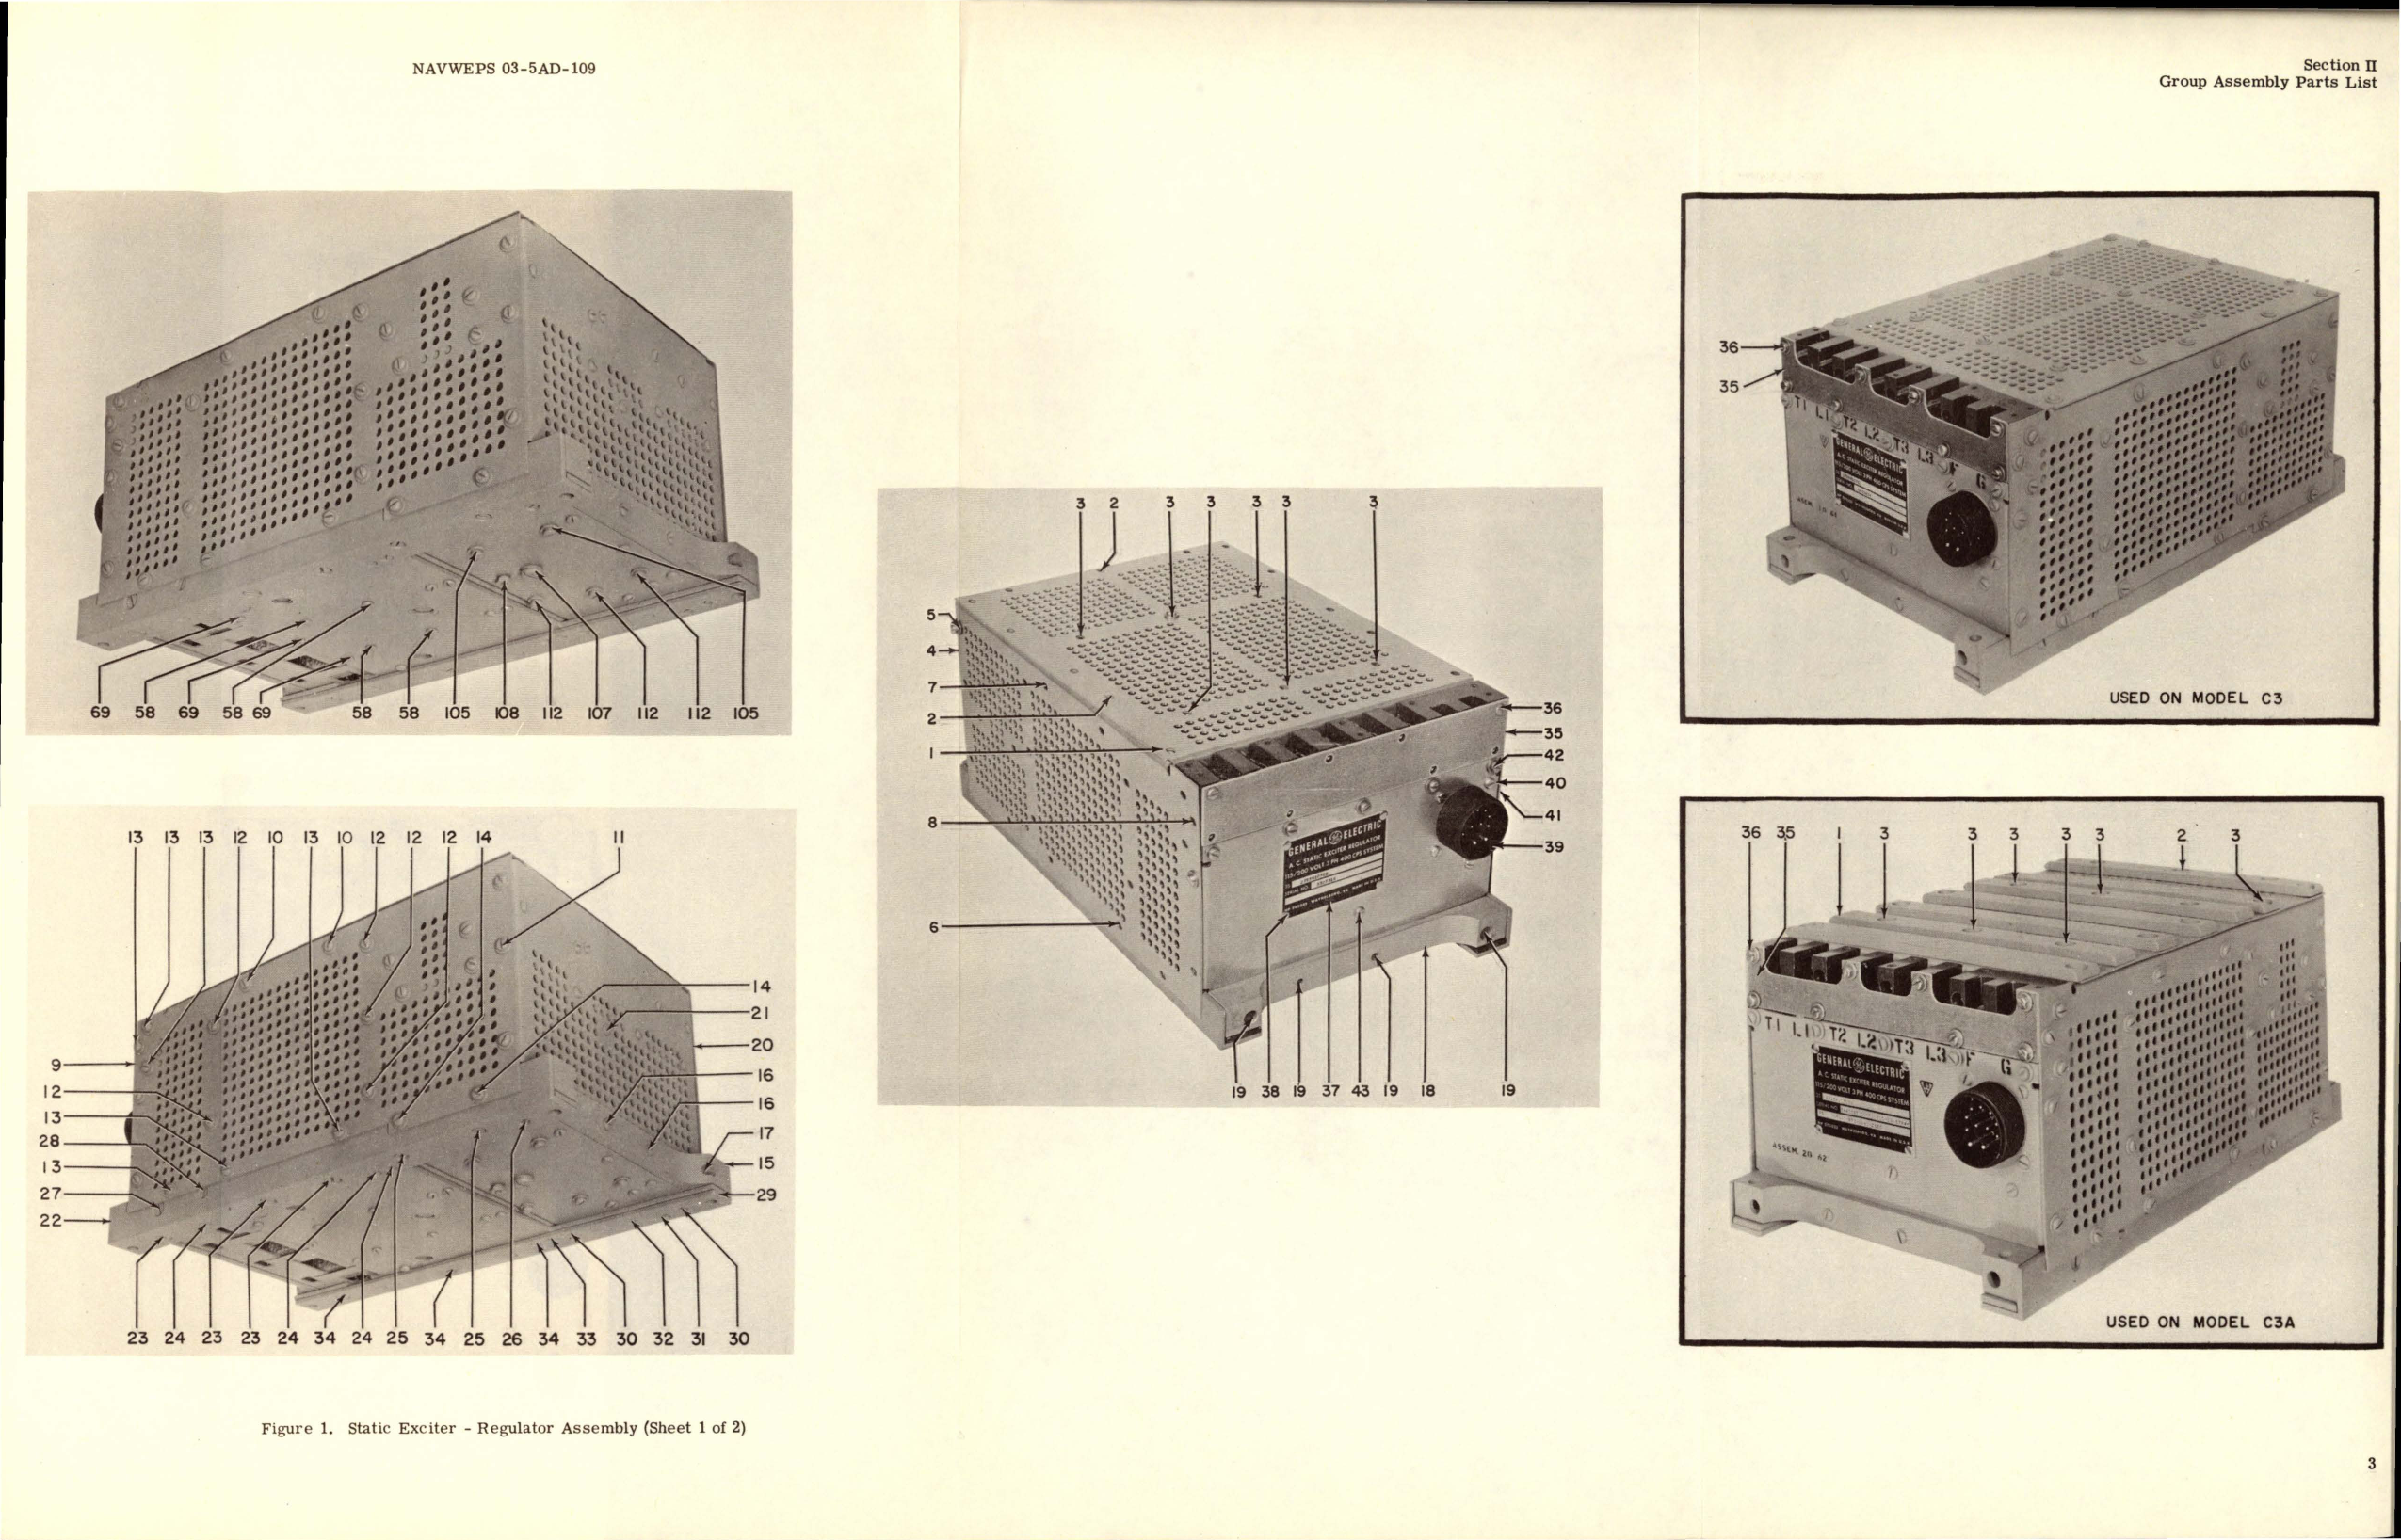 Sample page 5 from AirCorps Library document: Illustrated Parts Breakdown for Static Exciter Regulator - Models 3S2795H107C2, 3S2795H107C3, and 3S2795H107C3A 